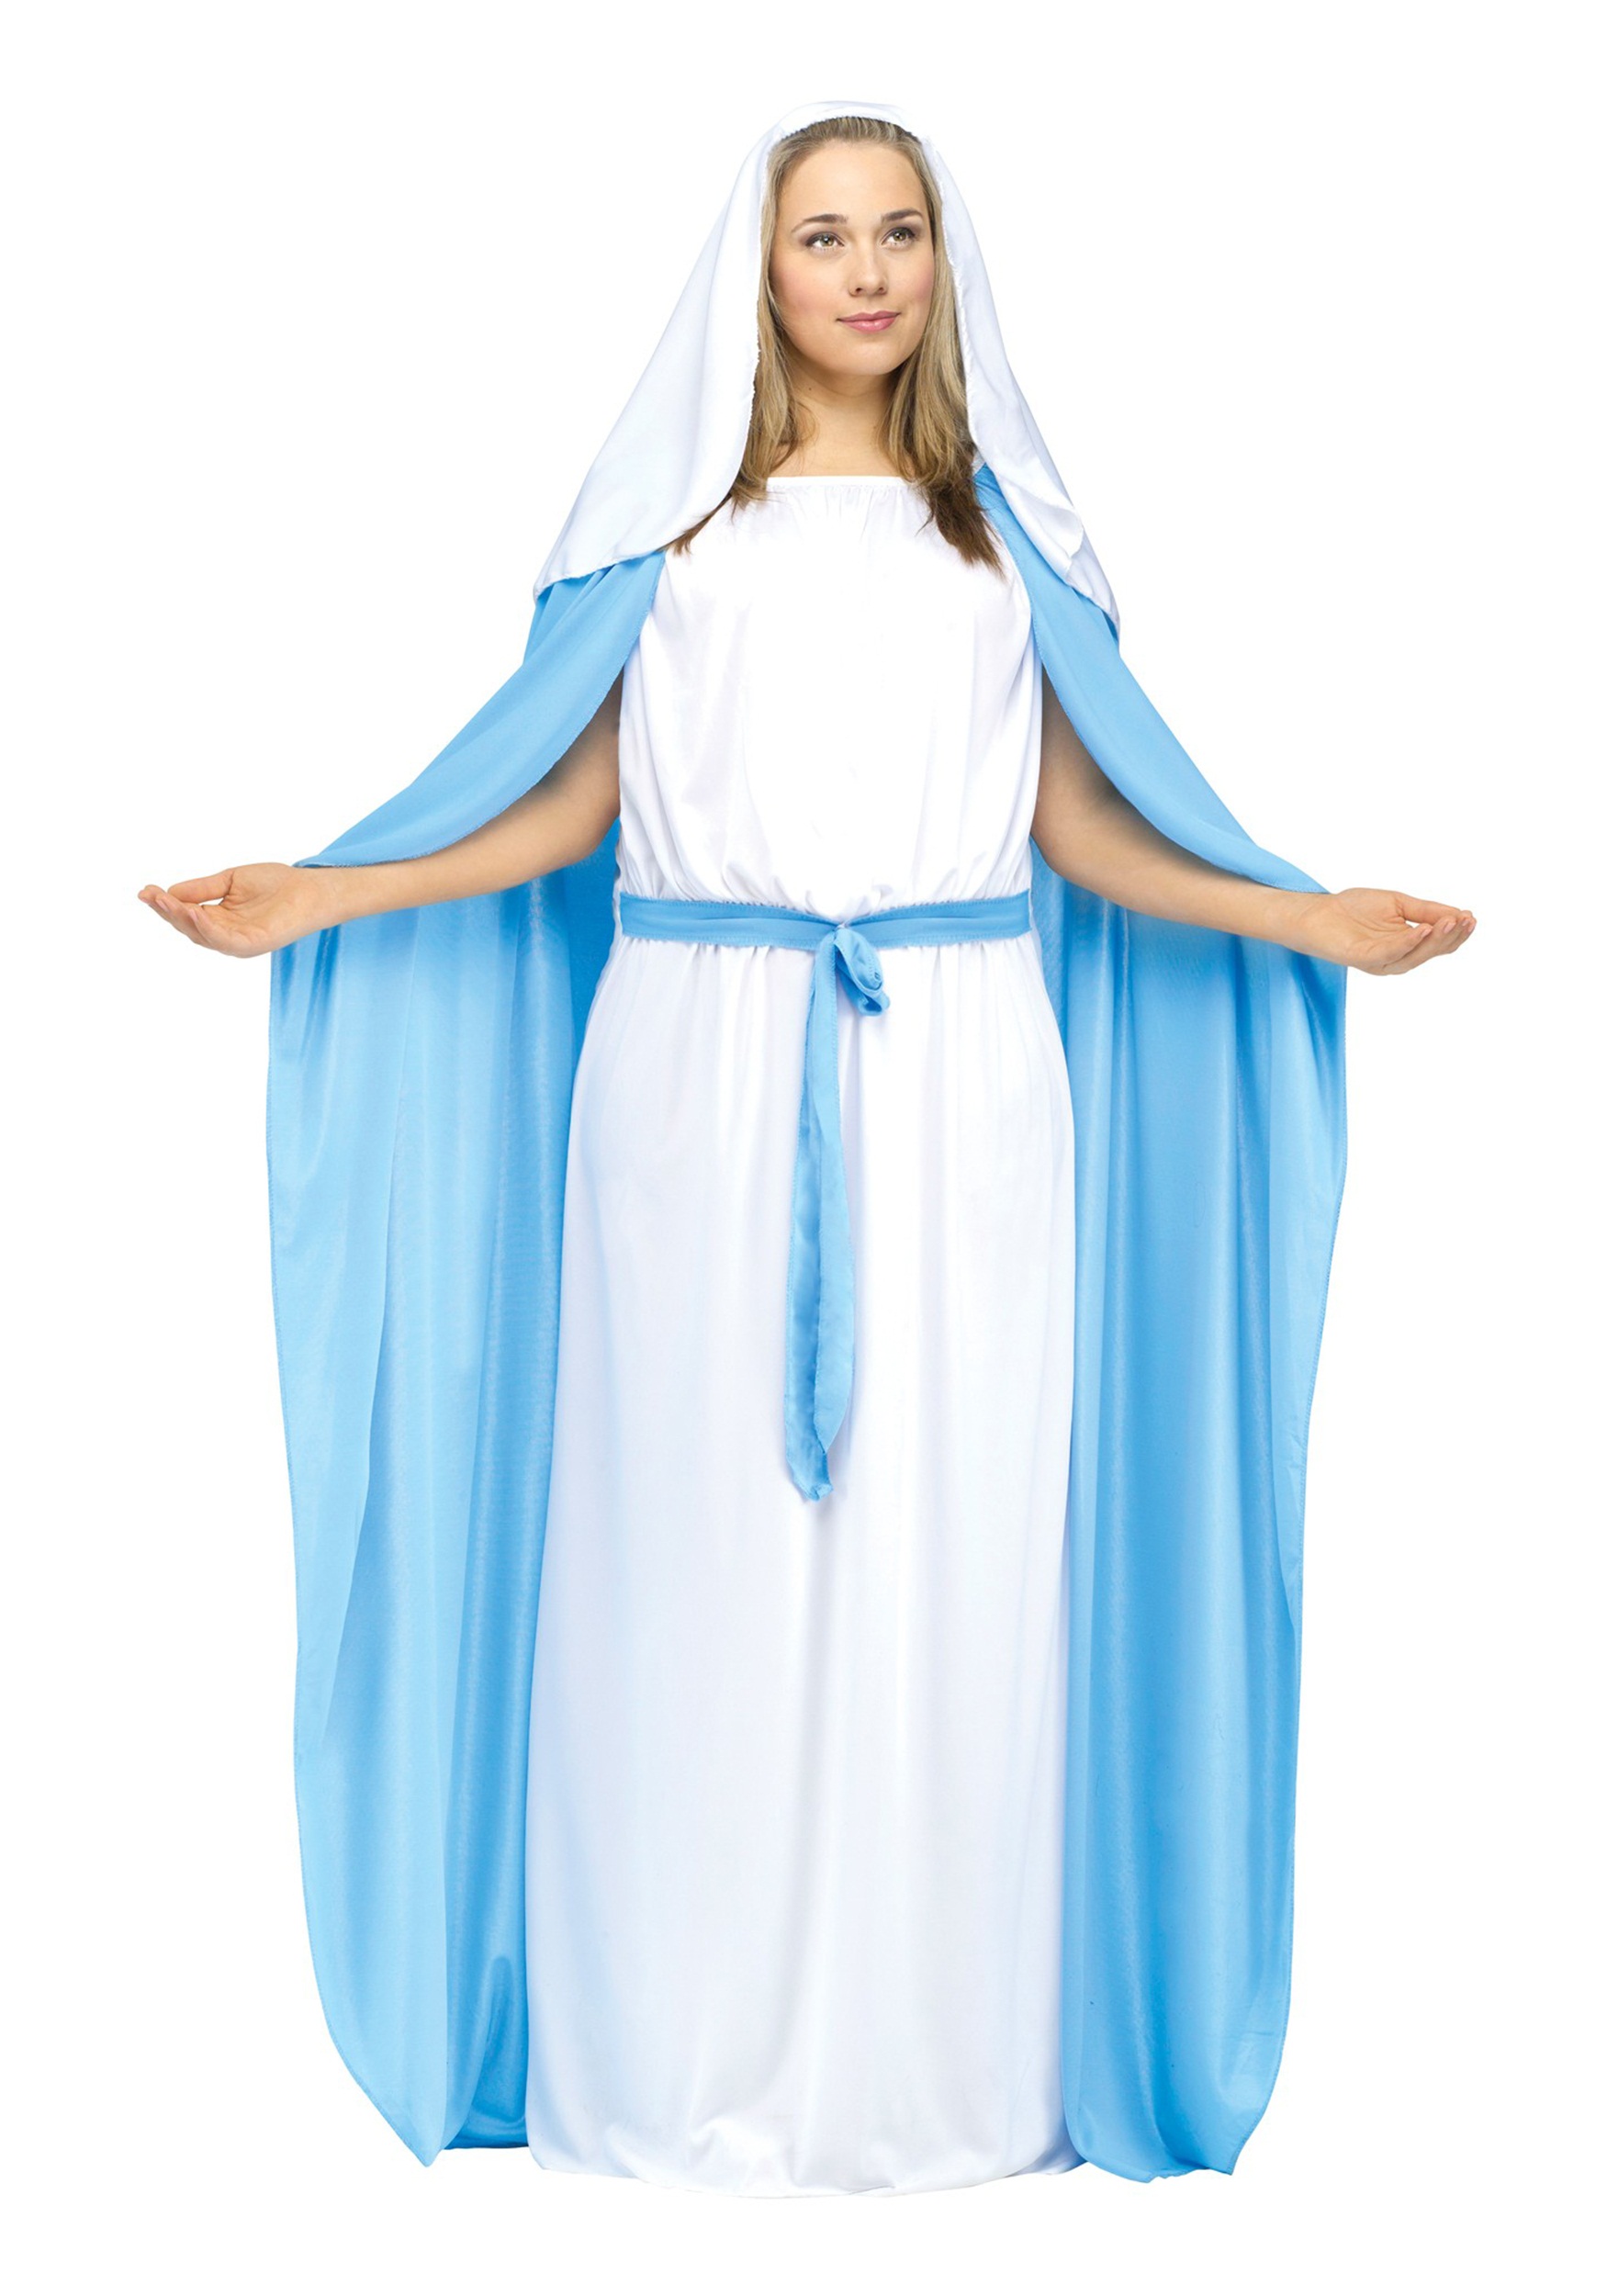 Mother Mary Plus Size Women's Costume